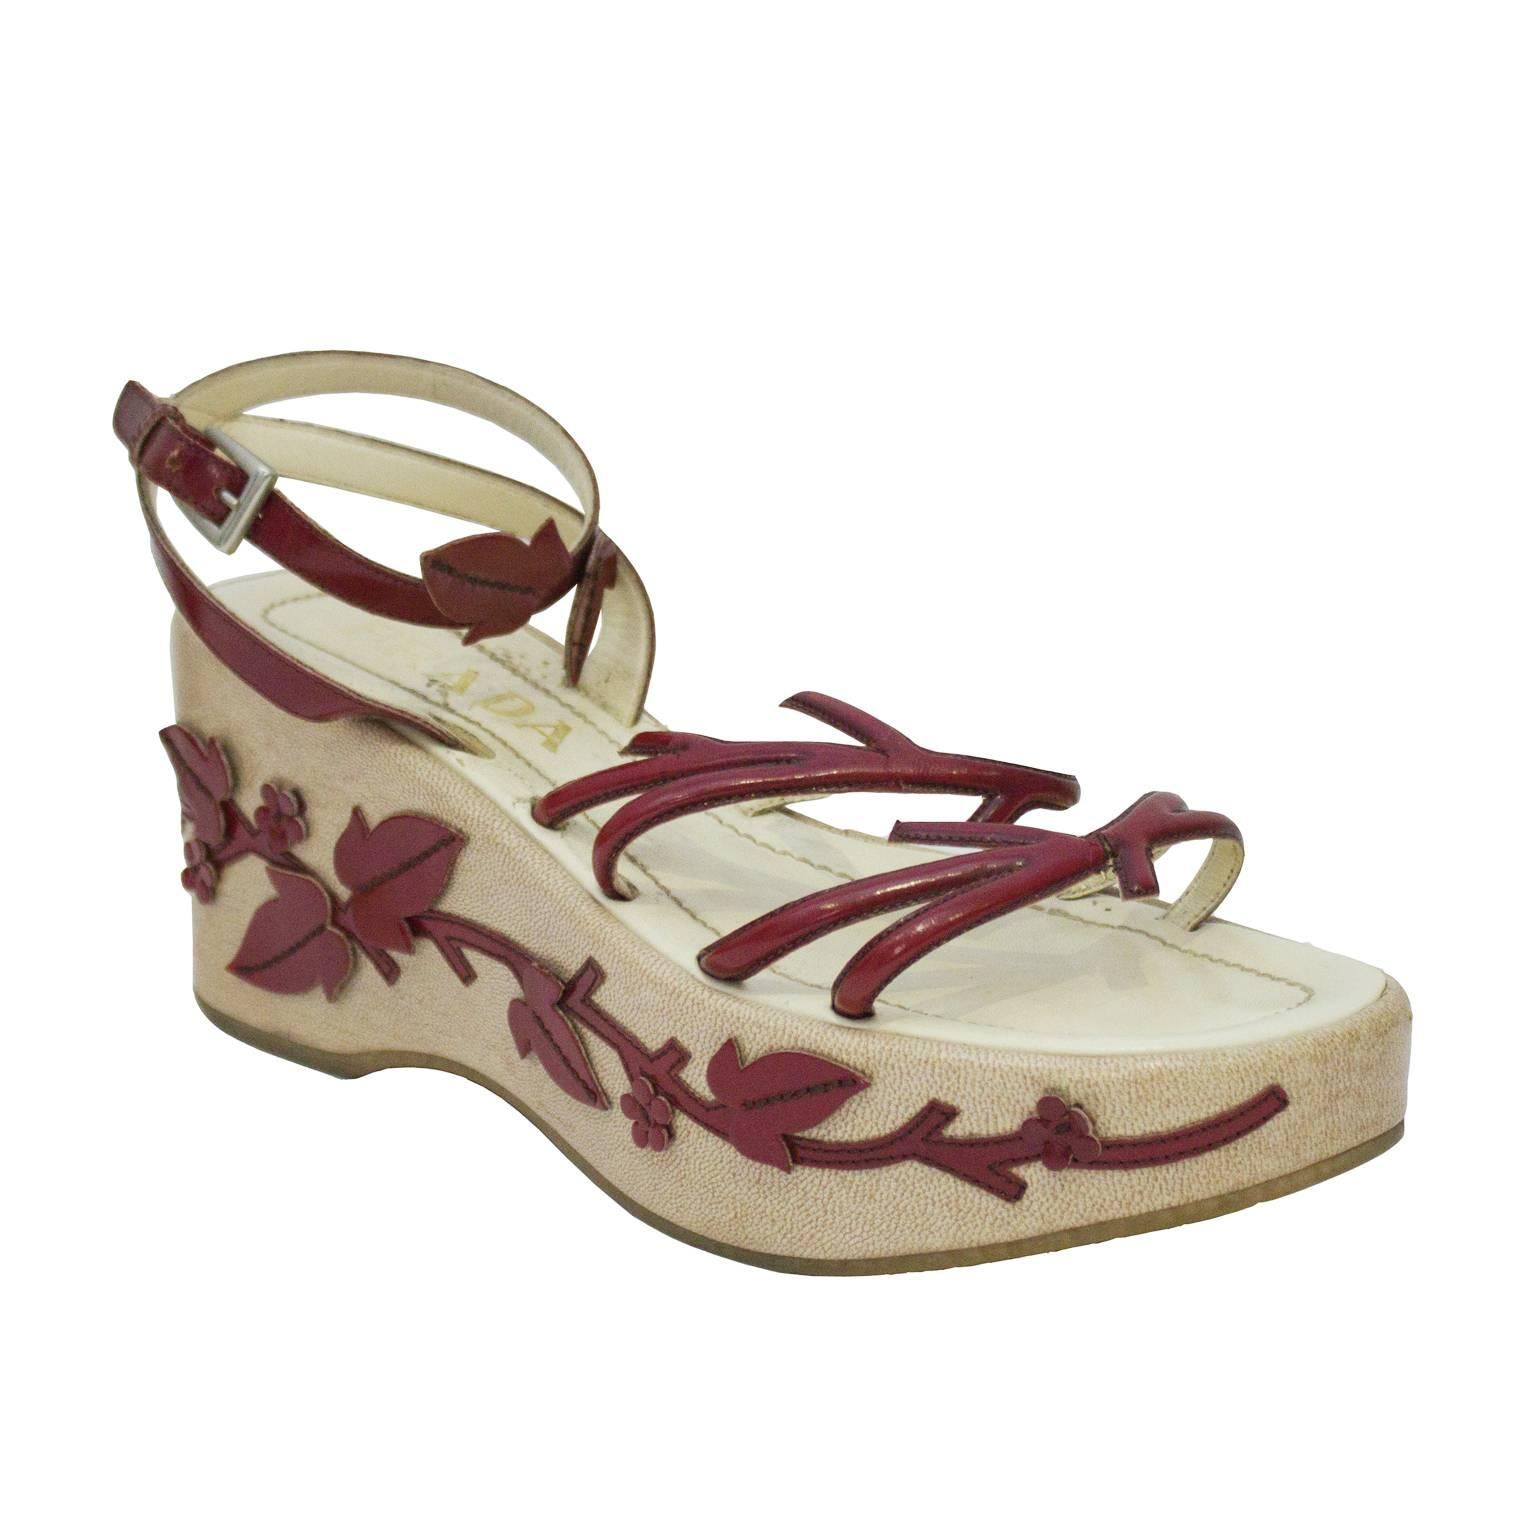 Fabulous platform wedge sandals from Prada's spring/summer 1997 collection. Platform is a nude color, decorated with stunning leaf and vine design crafted from wine red leather. Delicate ankle straps paired with chunky platforms are a staple of 90's